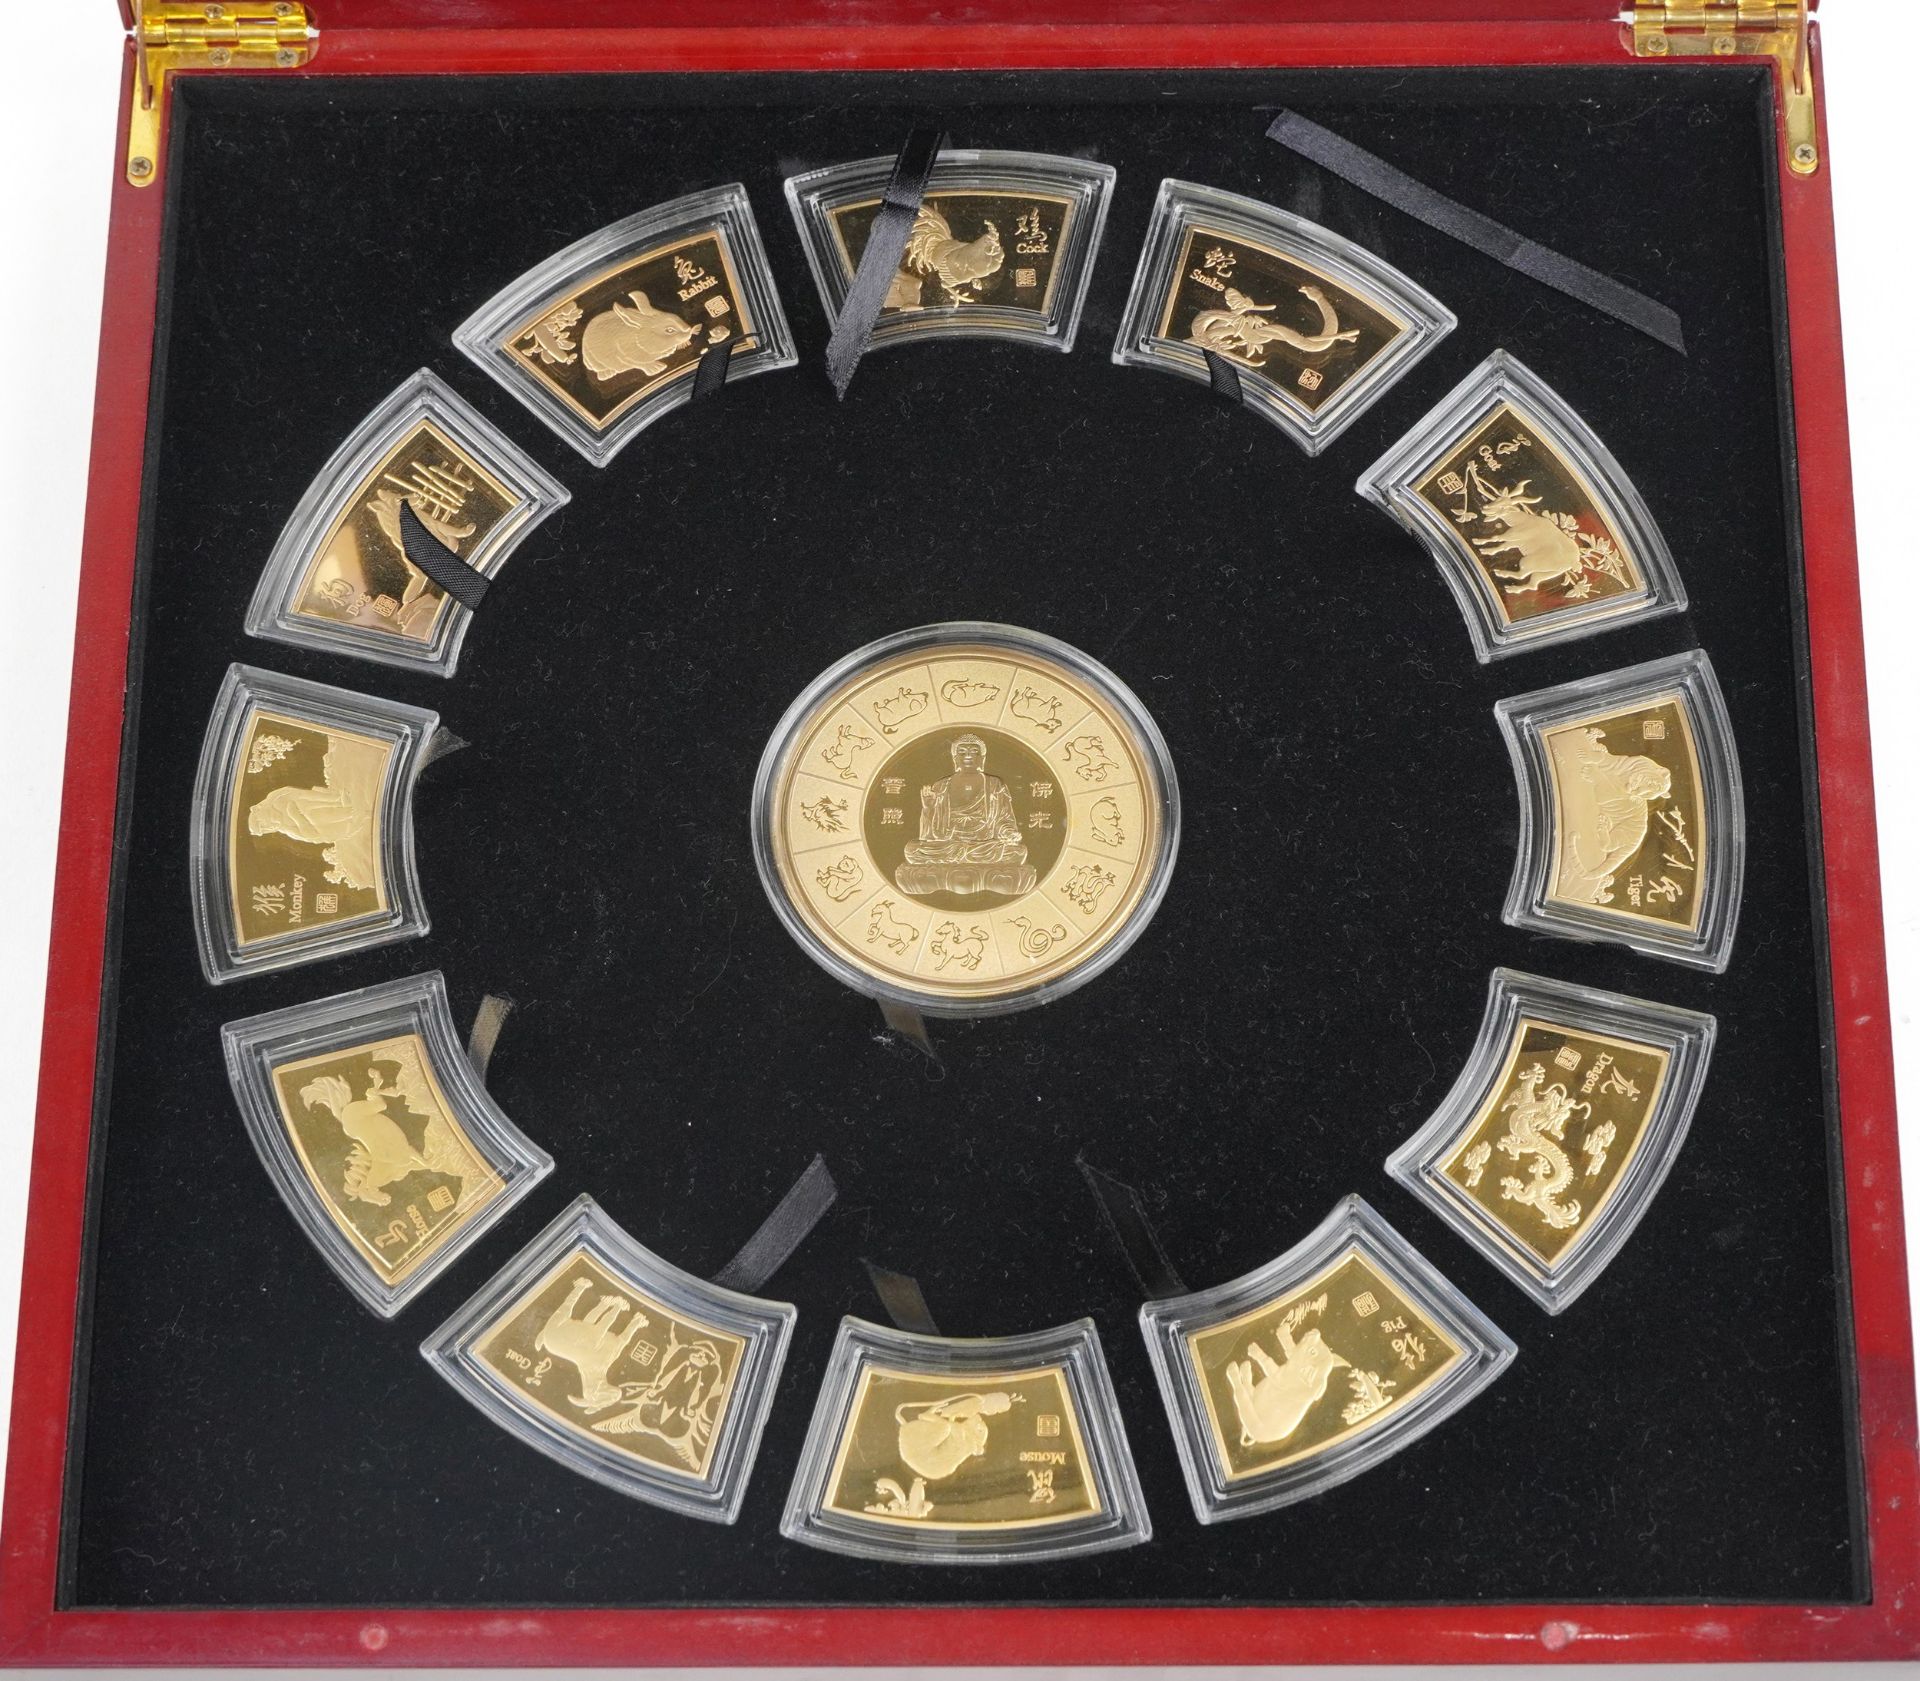 Set of Chinese zodiac ingots housed in a fitted box with protective box, 32cm x 32cm - Image 3 of 5